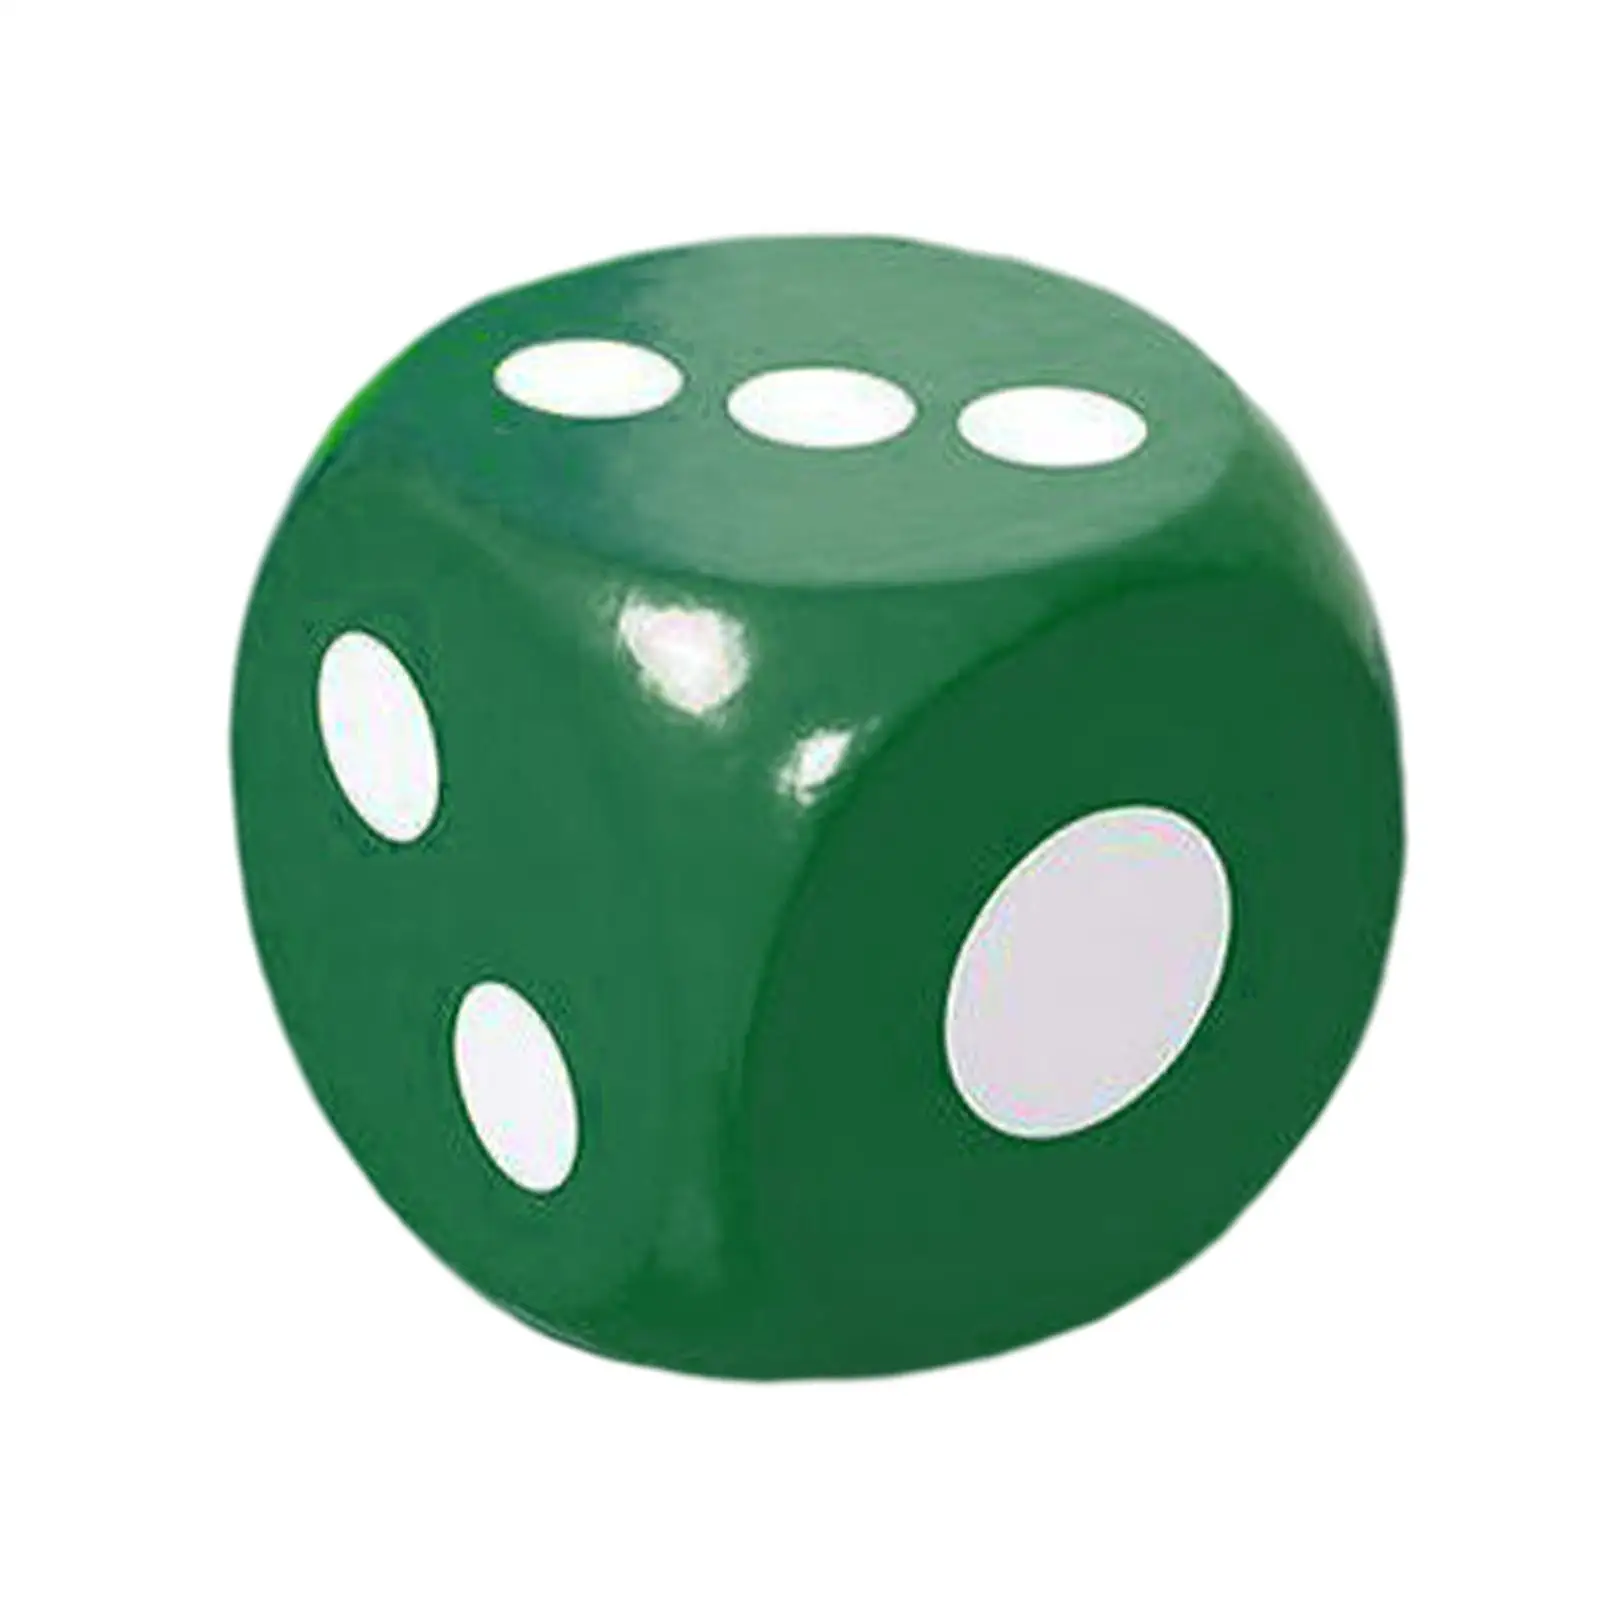 20cm Large Foam Dice 6 Sided Dot Dice Soft Foam Dice Early Math Skills for Kid Educational Toys Carnival School Supplies